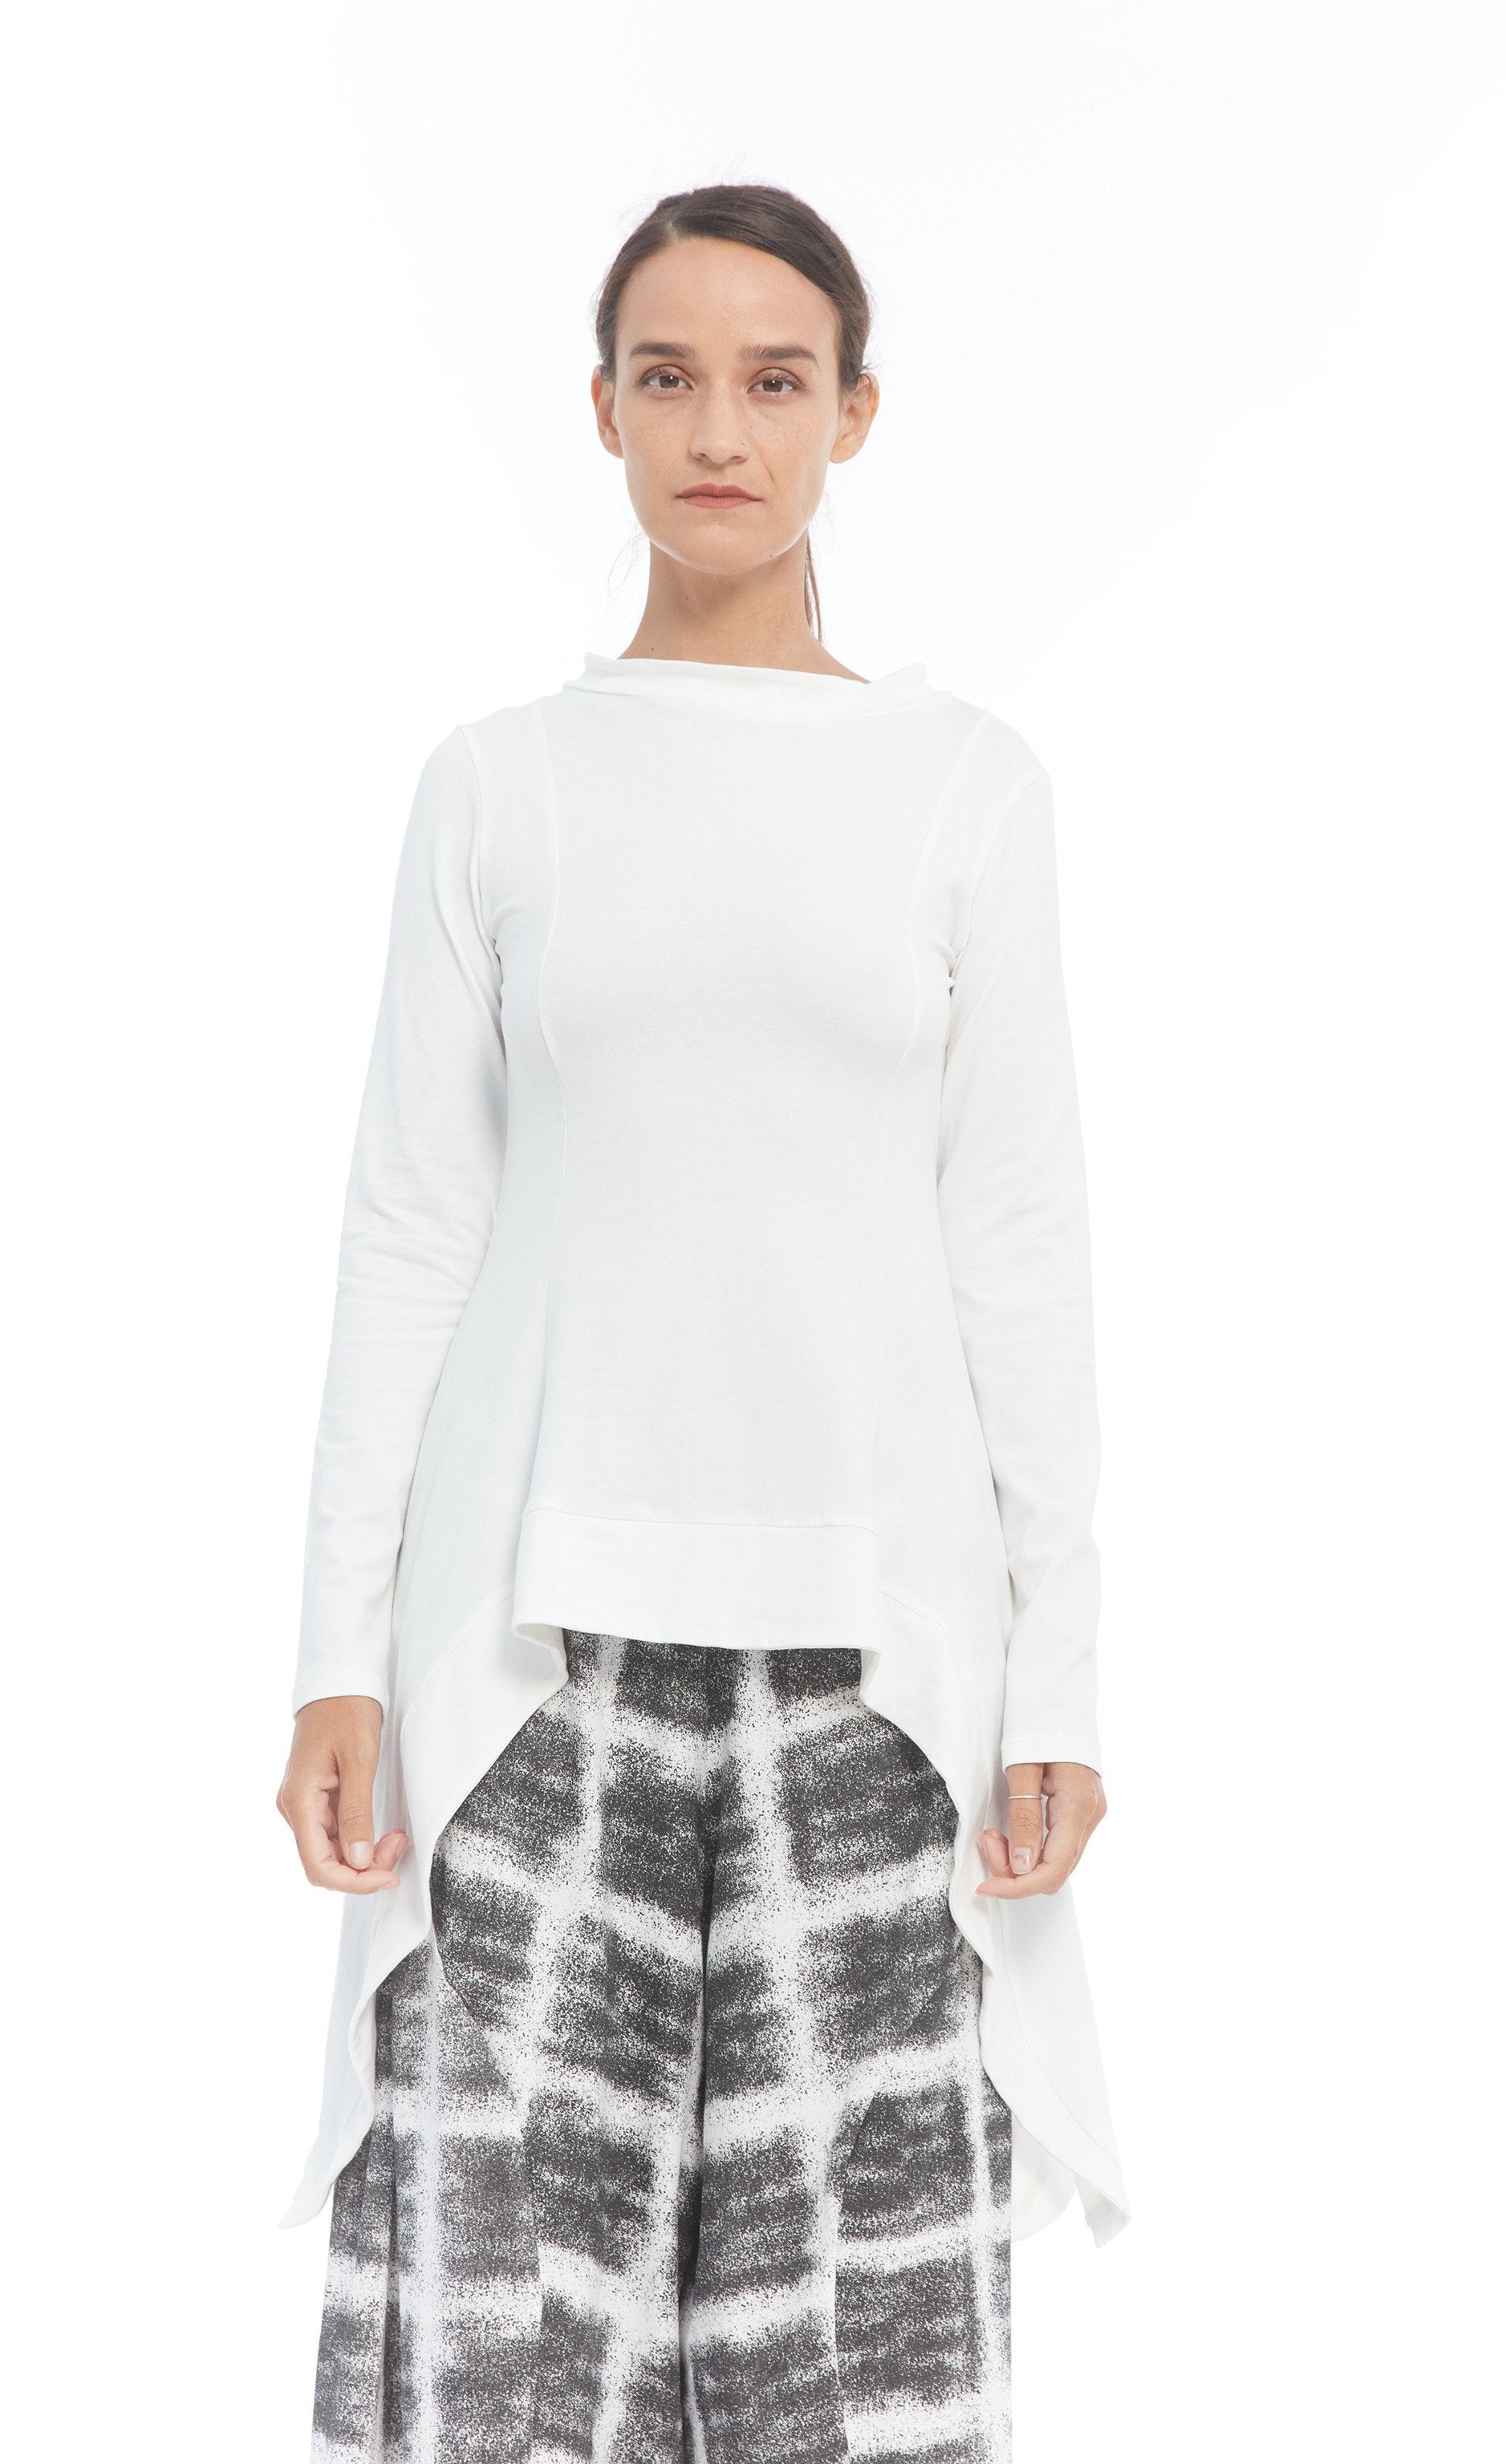 Front top half view of a woman wearing the mxmatthidlur lana top in white. This top has long sleeves, longer sides, and a high boat neck.